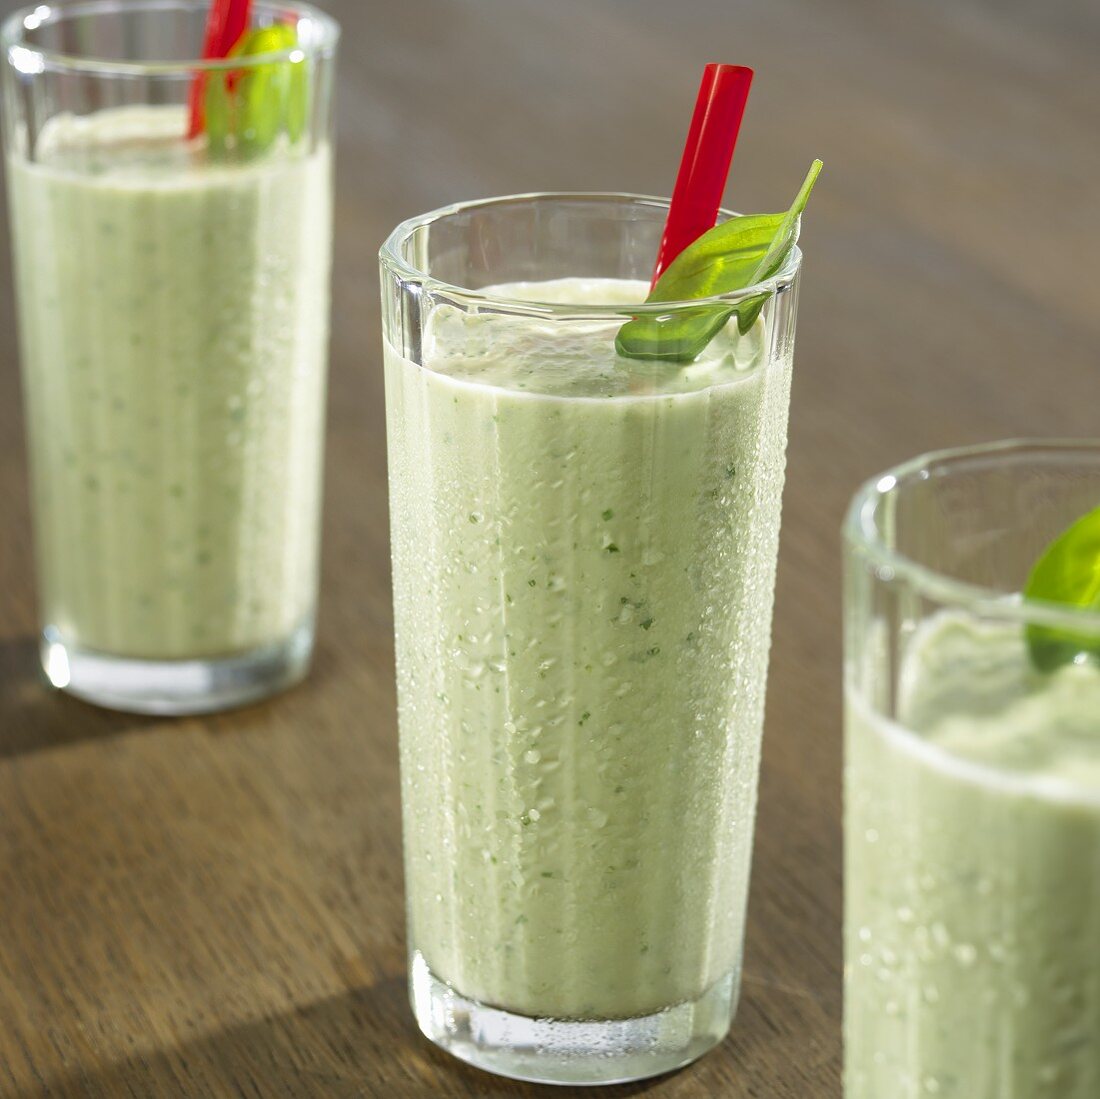 Cold cucumber and basil soup in three glasses with straws